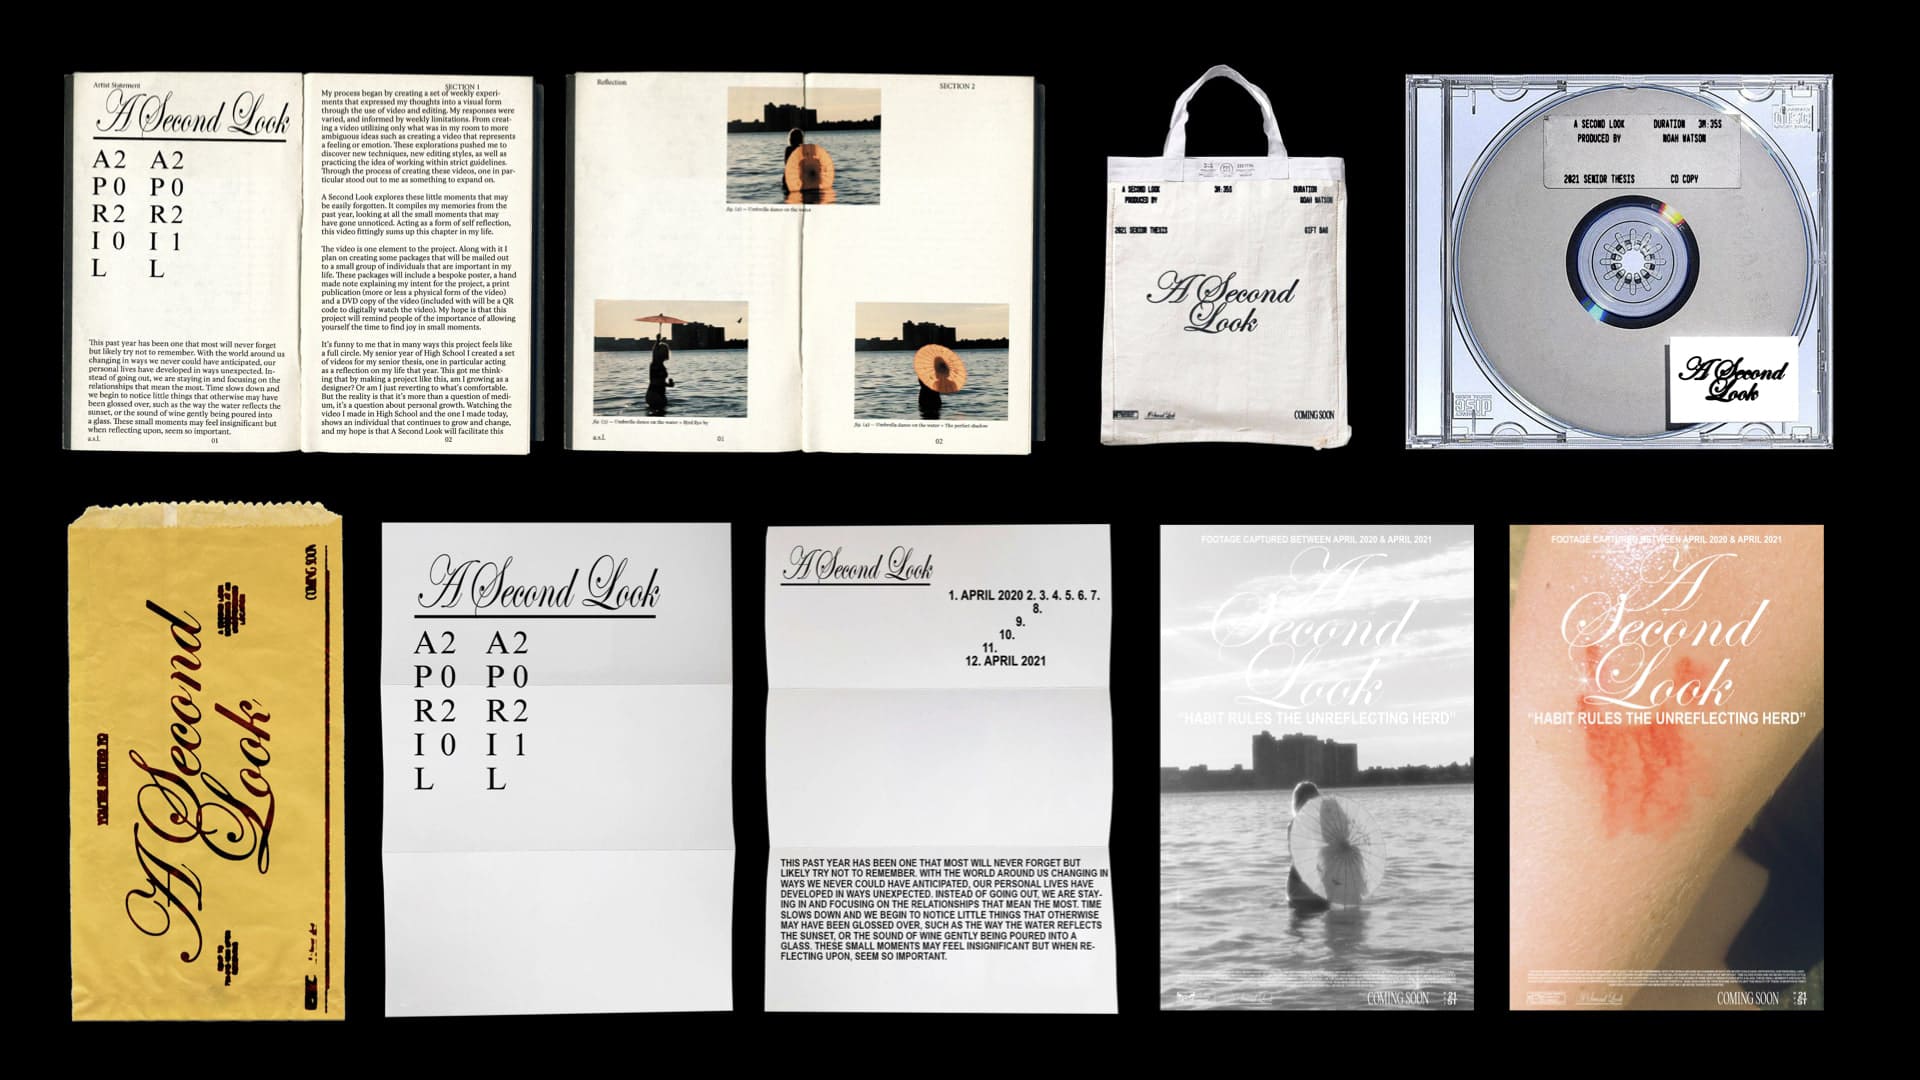 Two open books, a white tote bag with black text, a CD, a yellow paper bag with black text, two letters with black text, and two posters arranged on a black background. One book has plain black text, and the other has three photos of a woman at the beach. One poster has a black and white image of the same woman with a white title. The other poster has a photo of a white stair bannister with a blood smear with a white title that says "A second look".